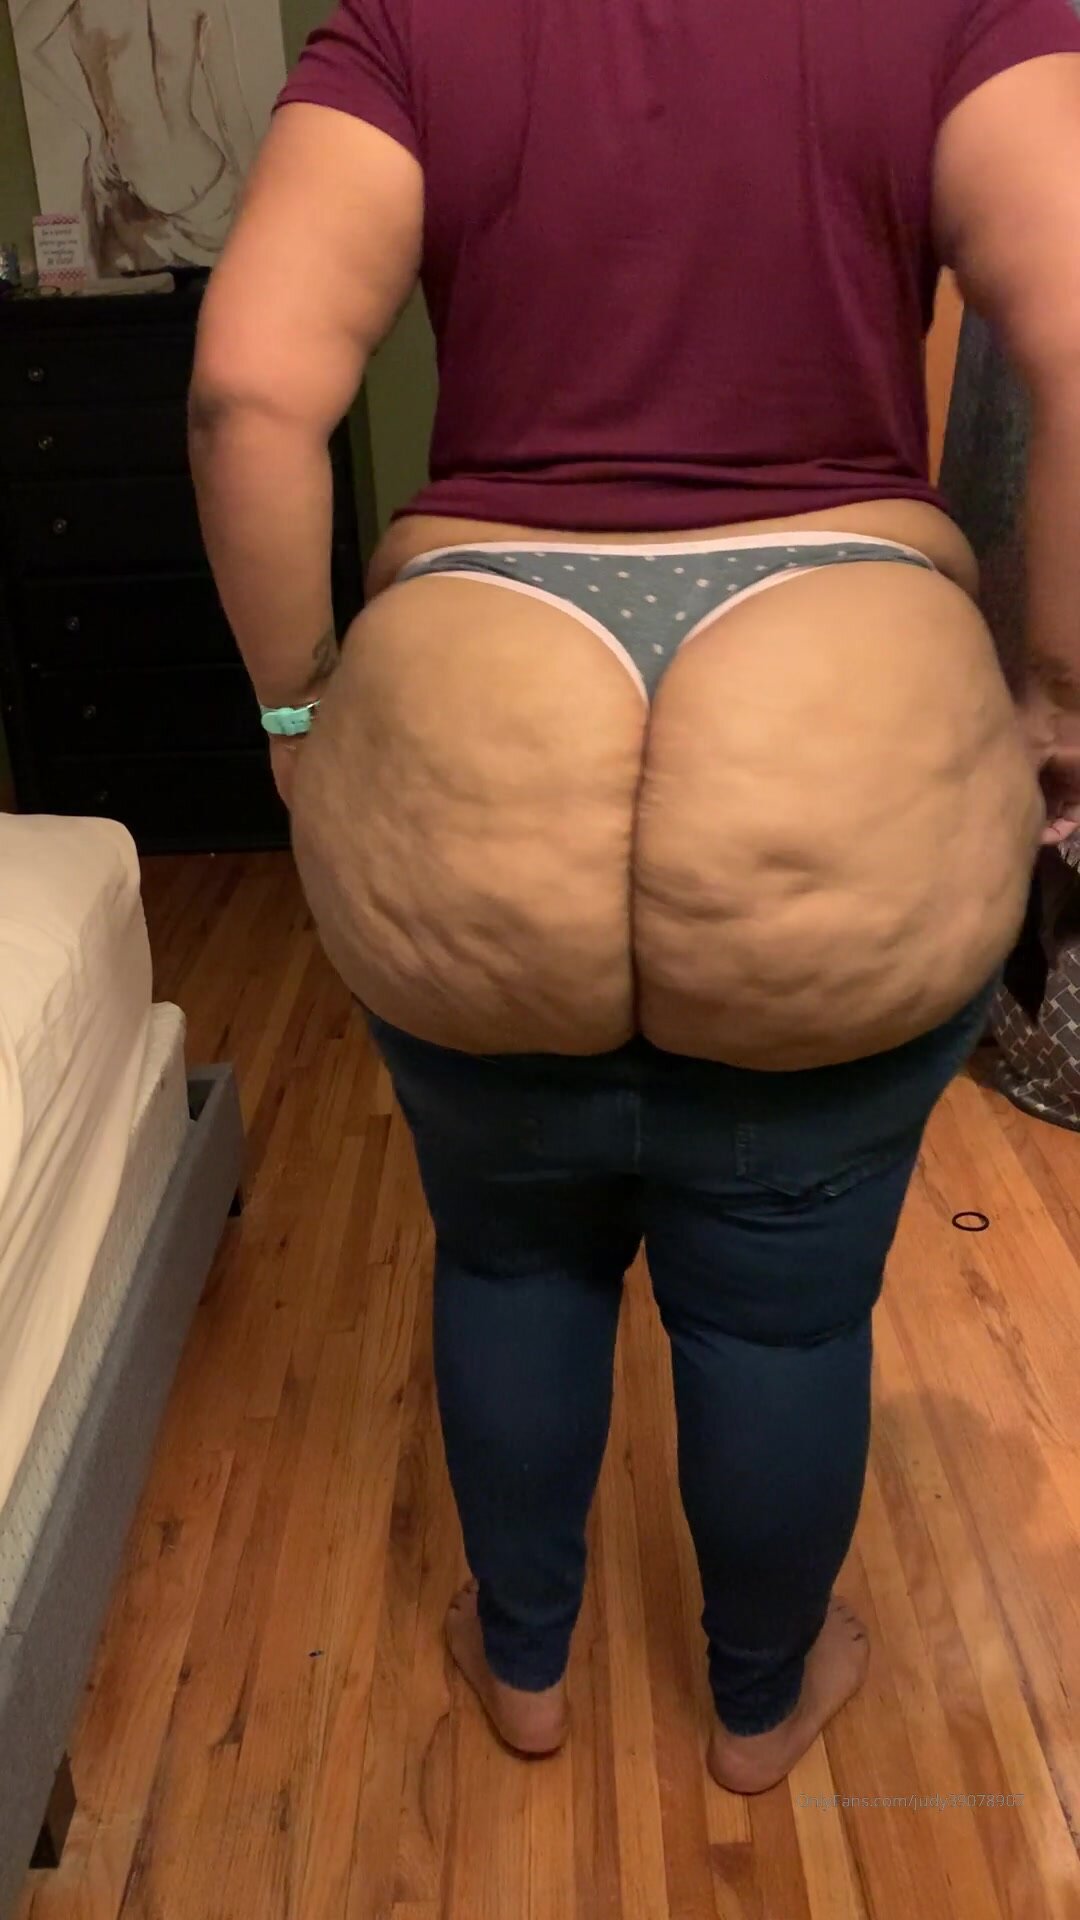 Pawg with fat cellulite ass tries on jeans image